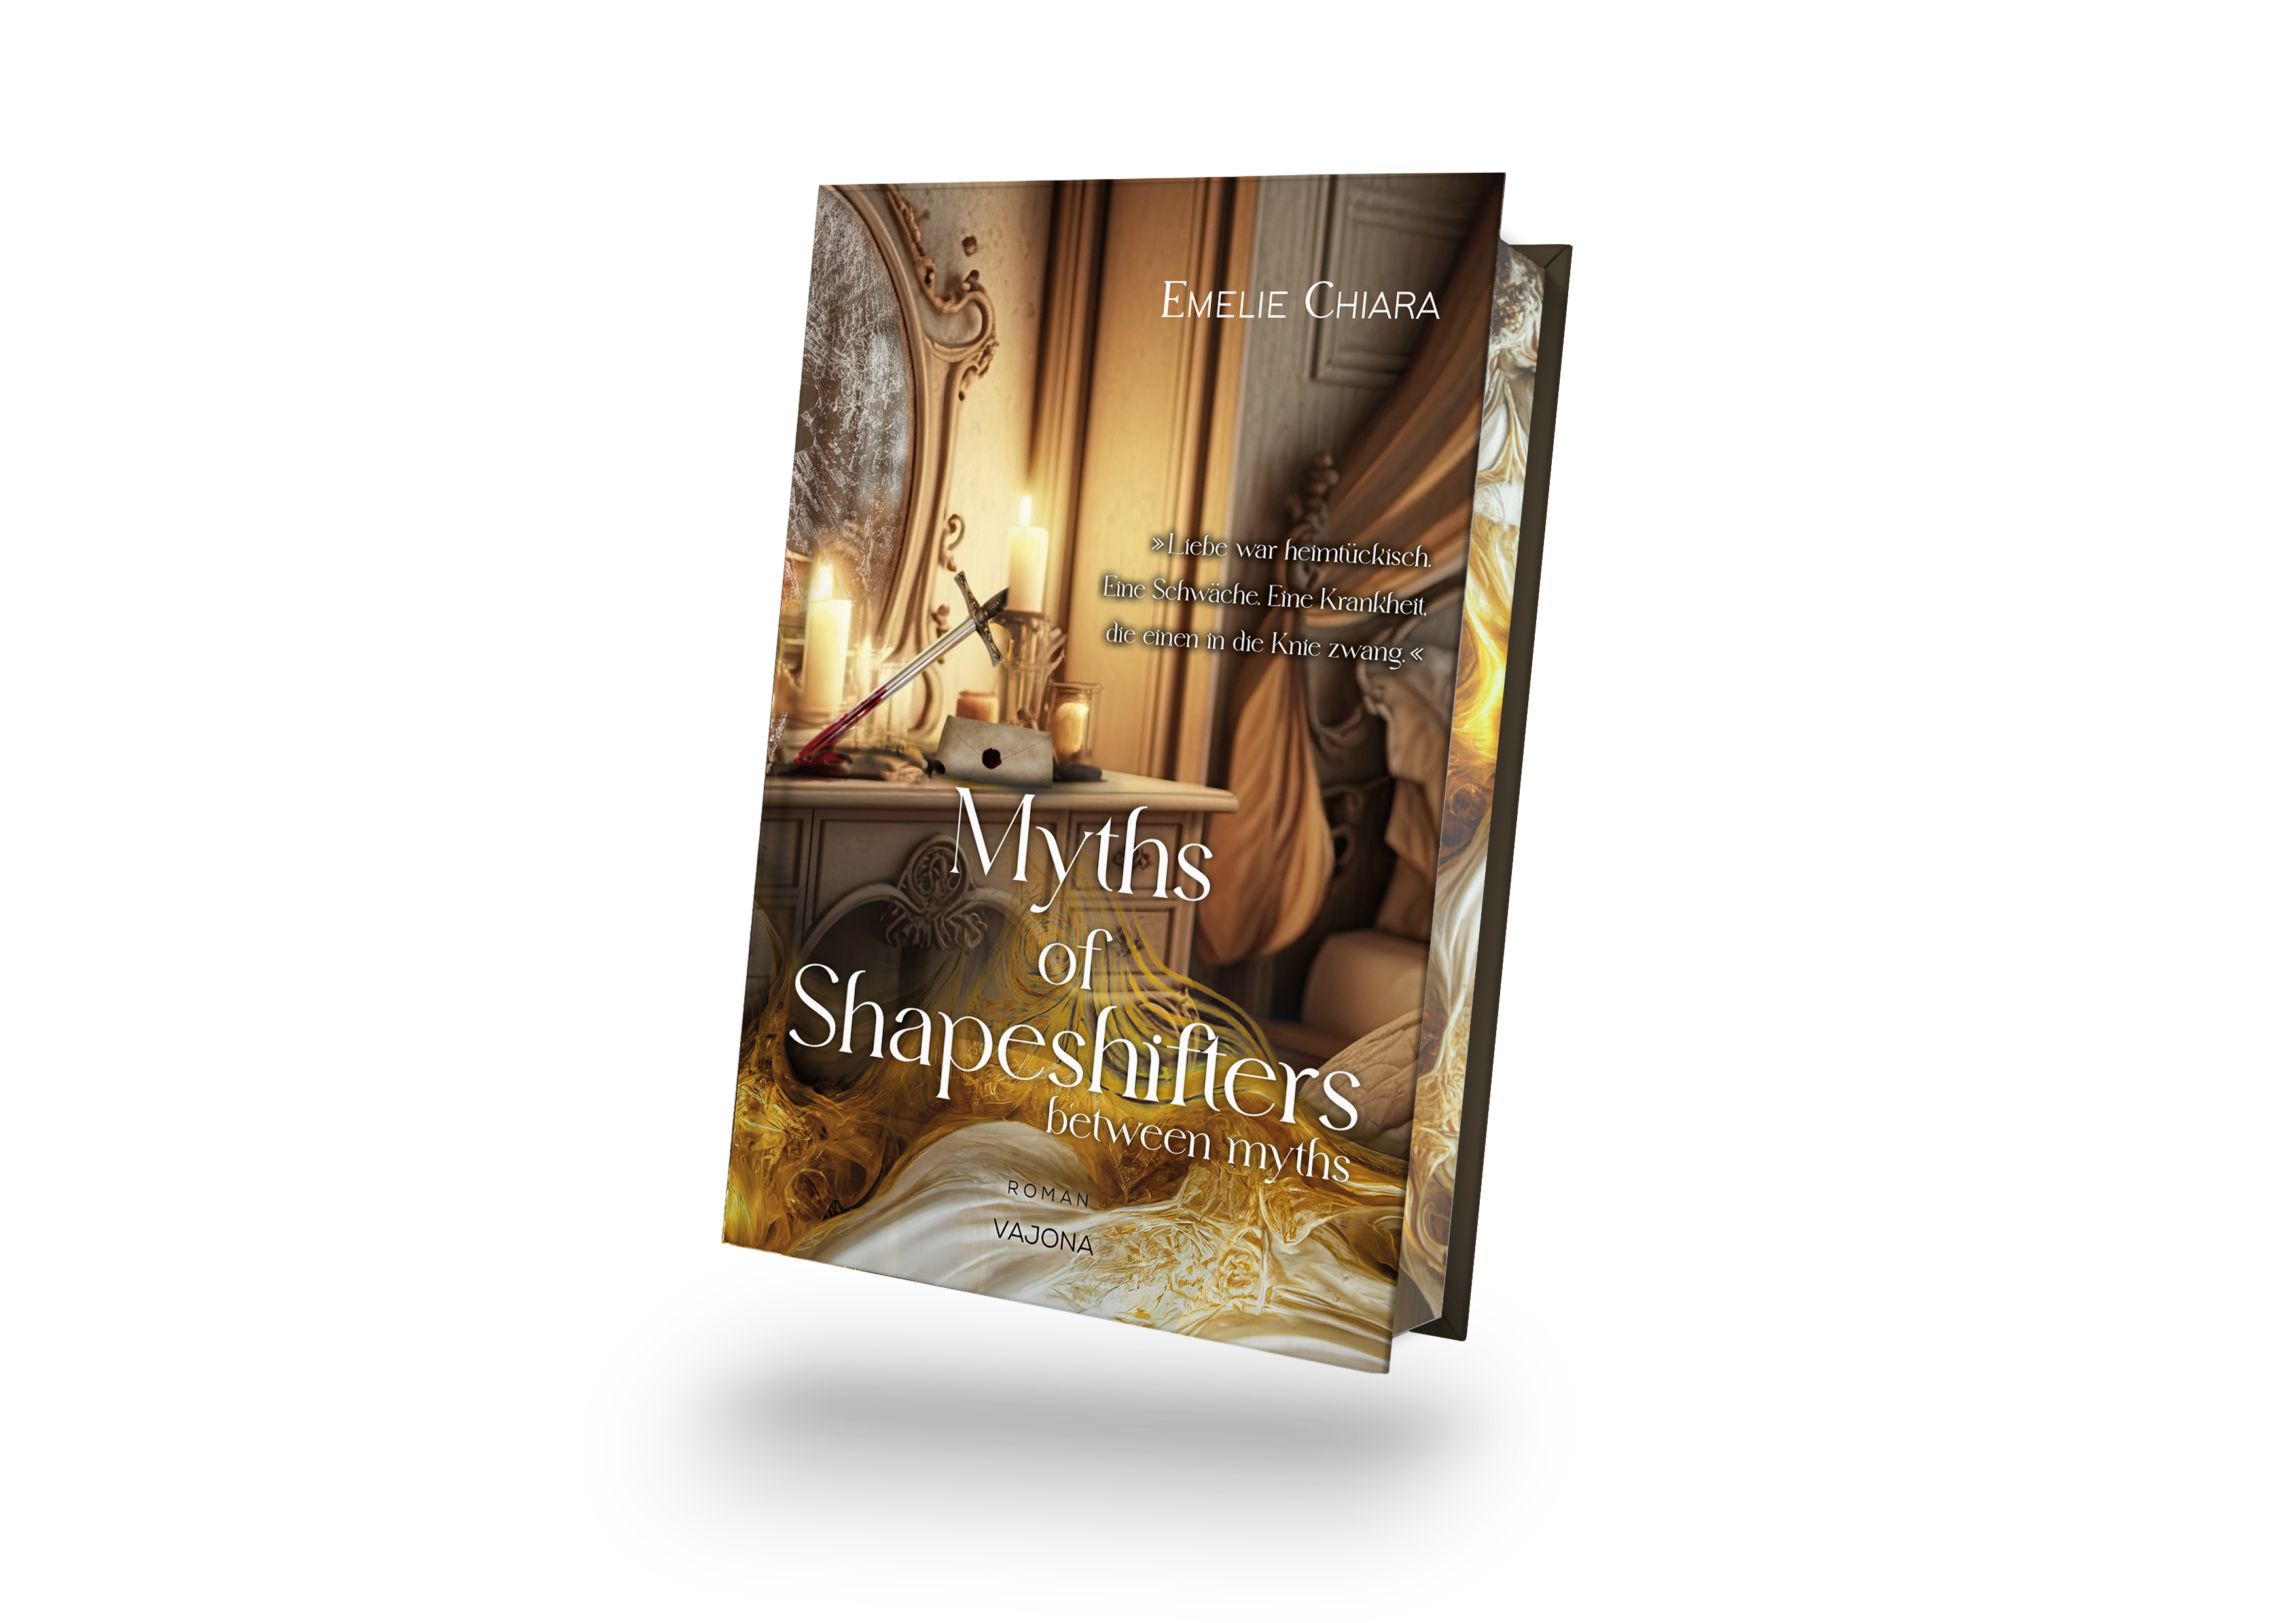 Myths of Shapeshifters - between myths (2)